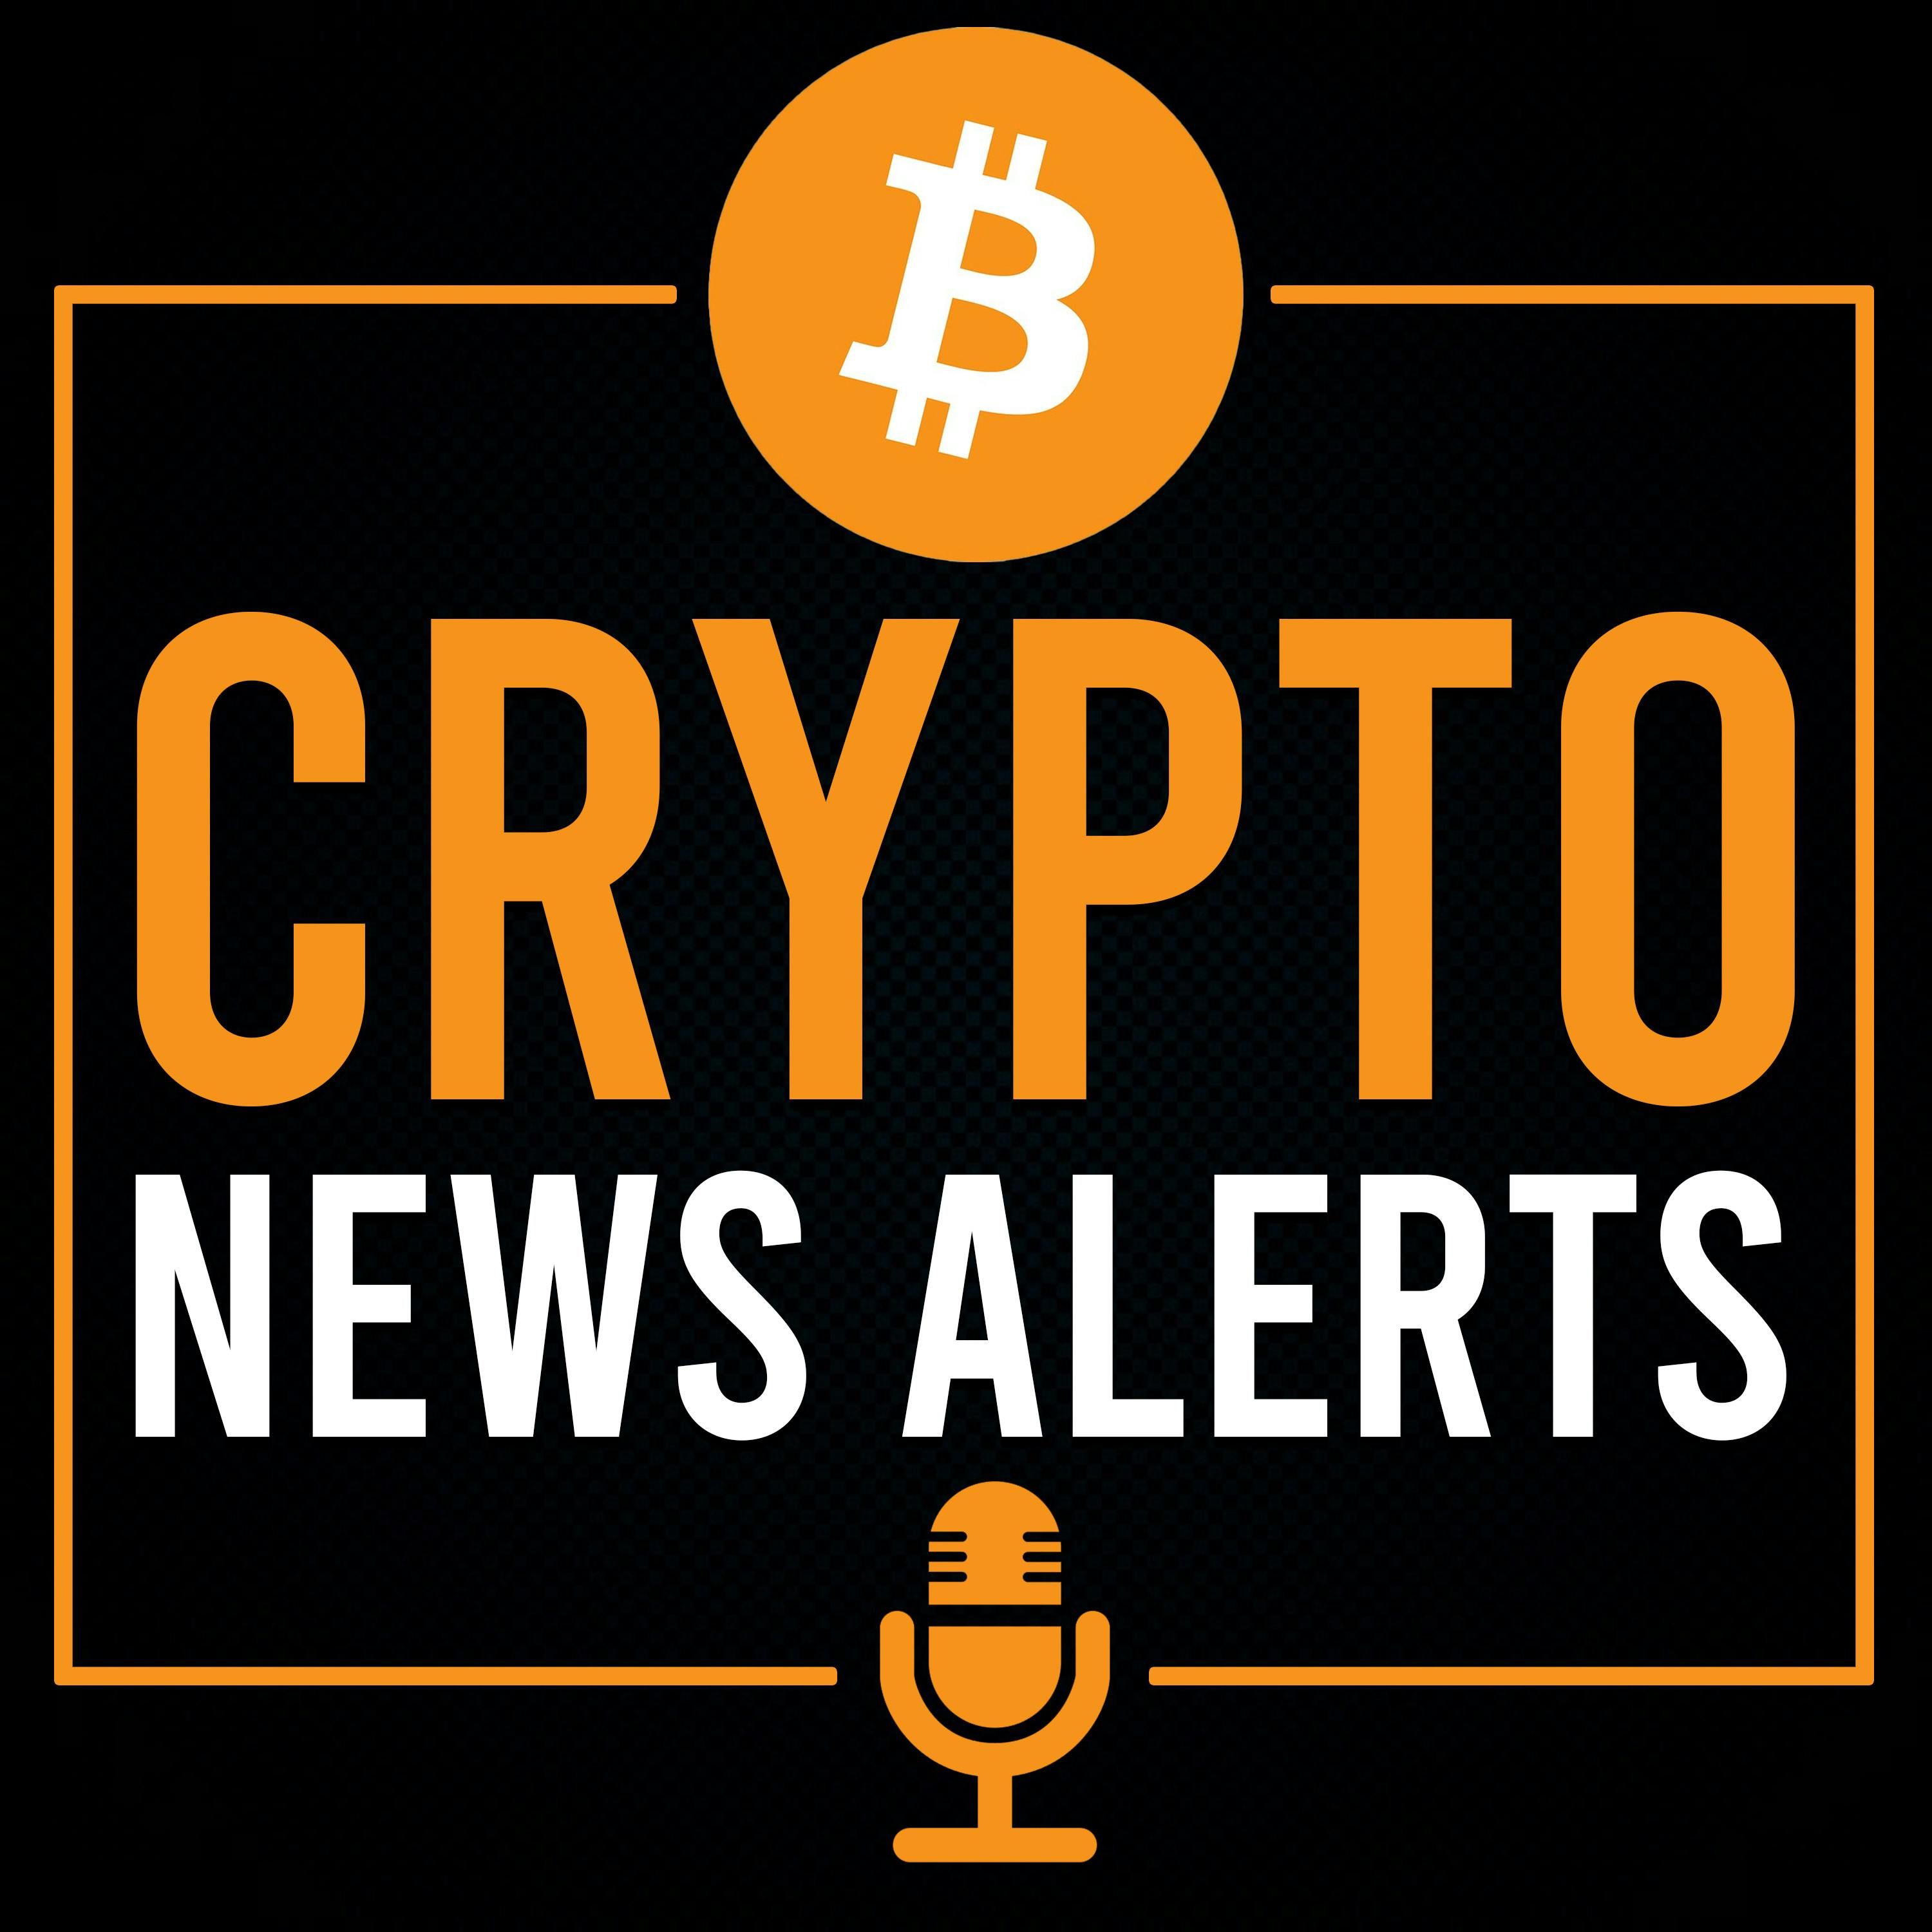 972: CRYPTO INFLUENCER ADAM BACK SAYS BITCOIN CAN STILL HIT $100K THIS YEAR AS THE DEFI SECOR CRUMBLES!!